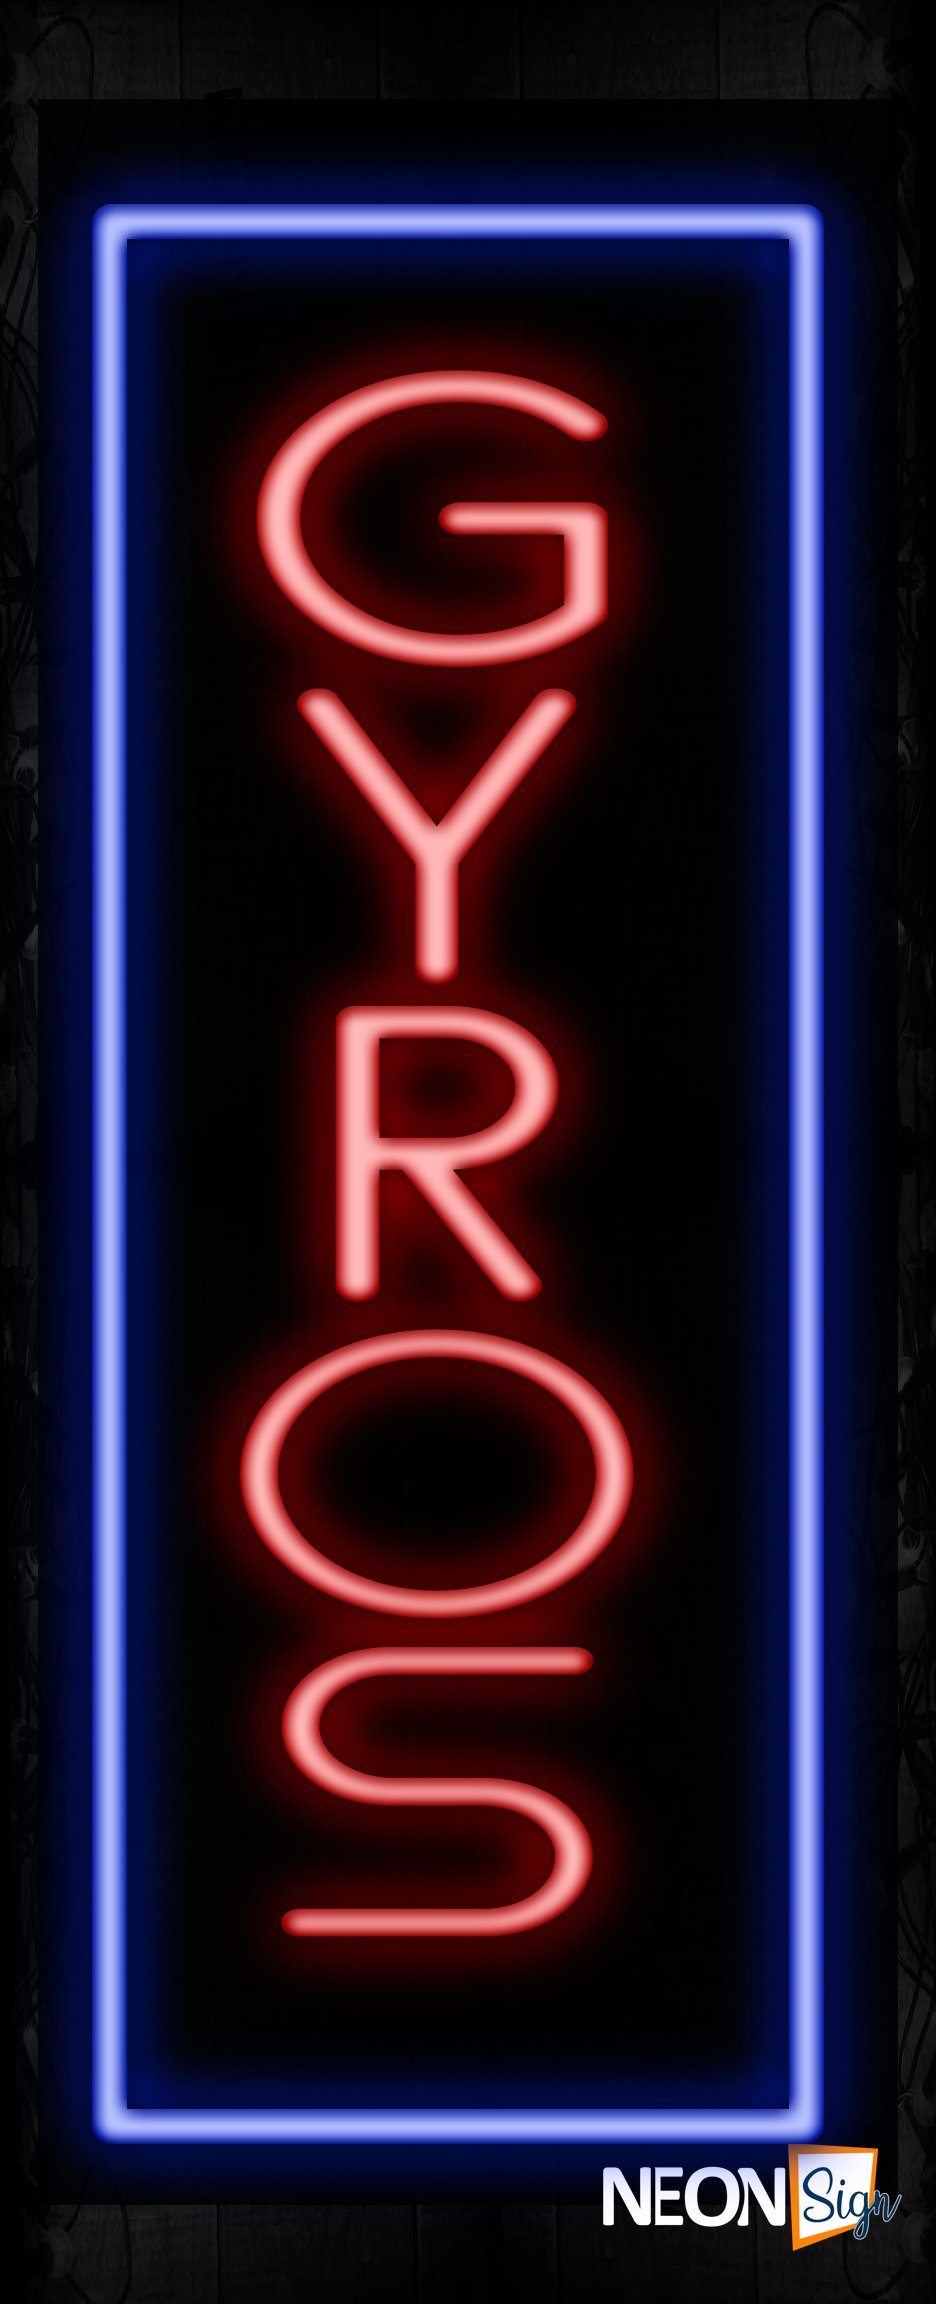 Image of 11568 Gyros in red with blue border (Vertical) Neon Signs_32 x12 Black Backing